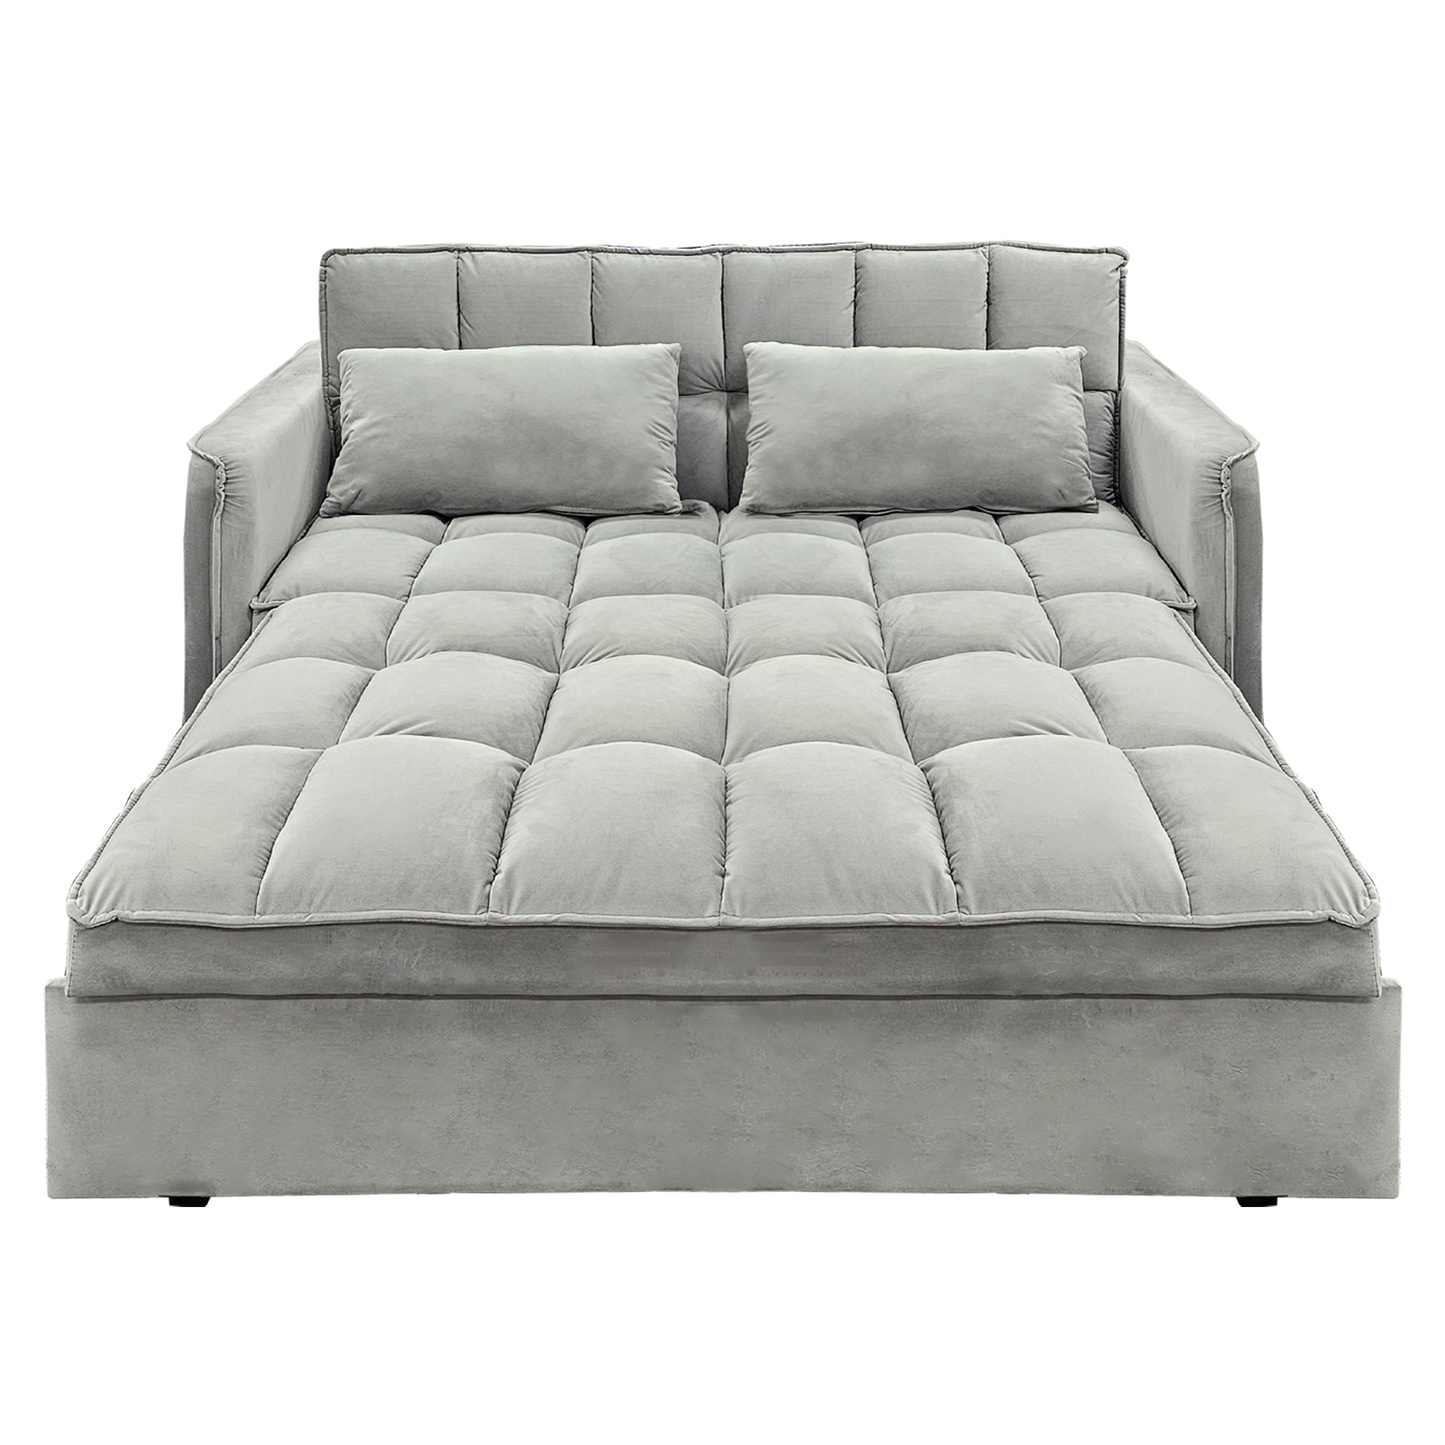 Sarantino Quincy 2-Seater Velvet Sofa Bed in Dark Grey with Wooden Frame and Tufted Design - Light Grey